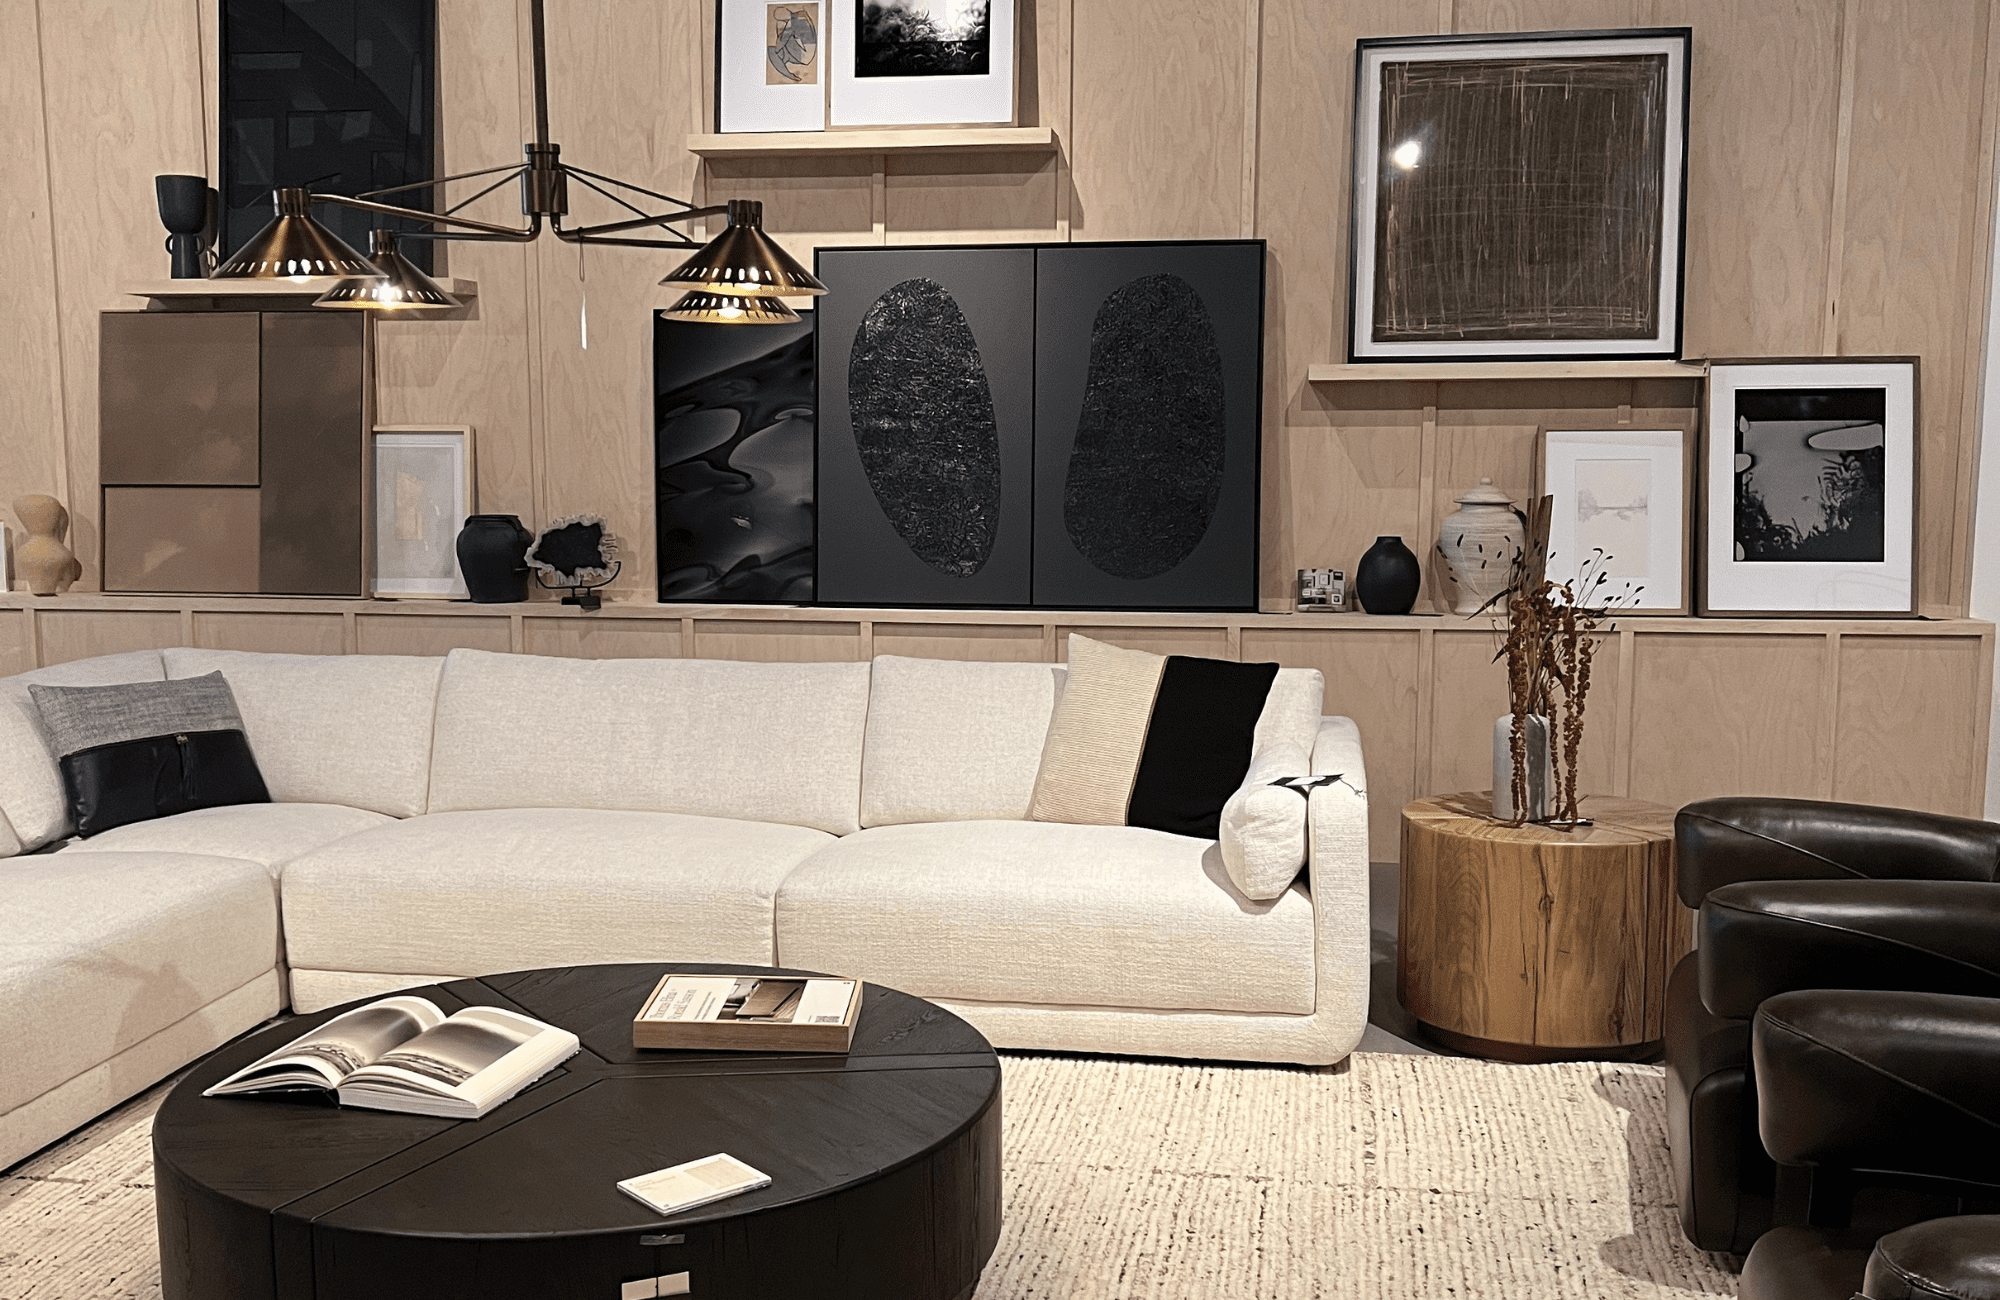 home-renovation-interior-design-claremont-tx-high-point-market-trip-review-living-room-with-trending-furnishings-sectional-coffee-table-earth-tones-boho.png